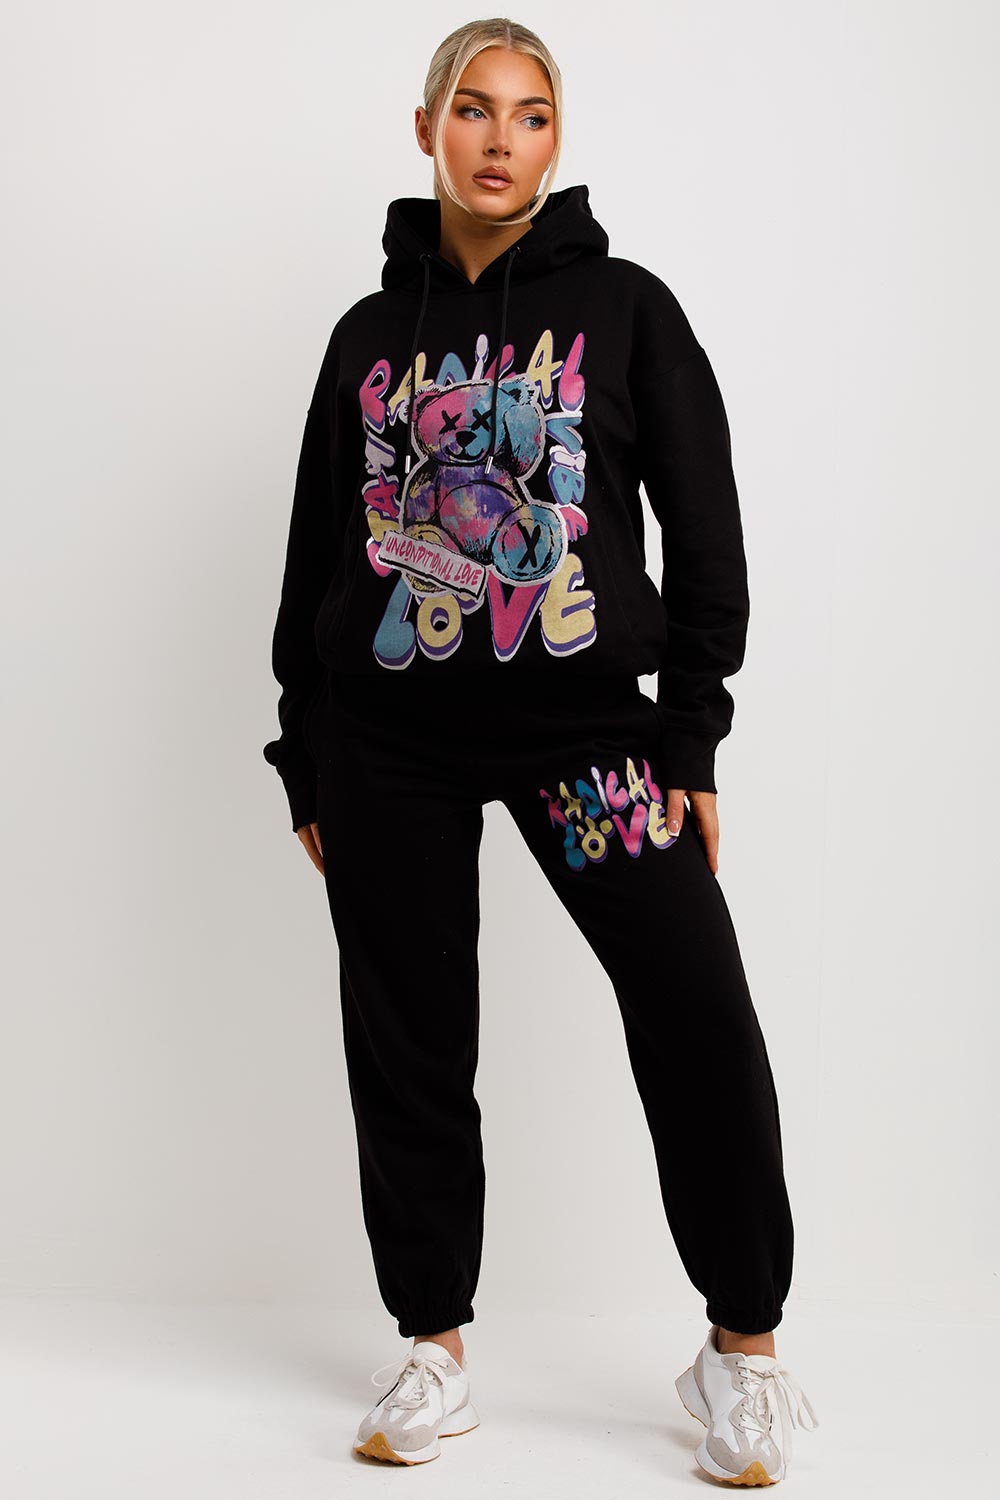 Tracksuit Hoodie Joggers Set With Radical Graphic Print Pink